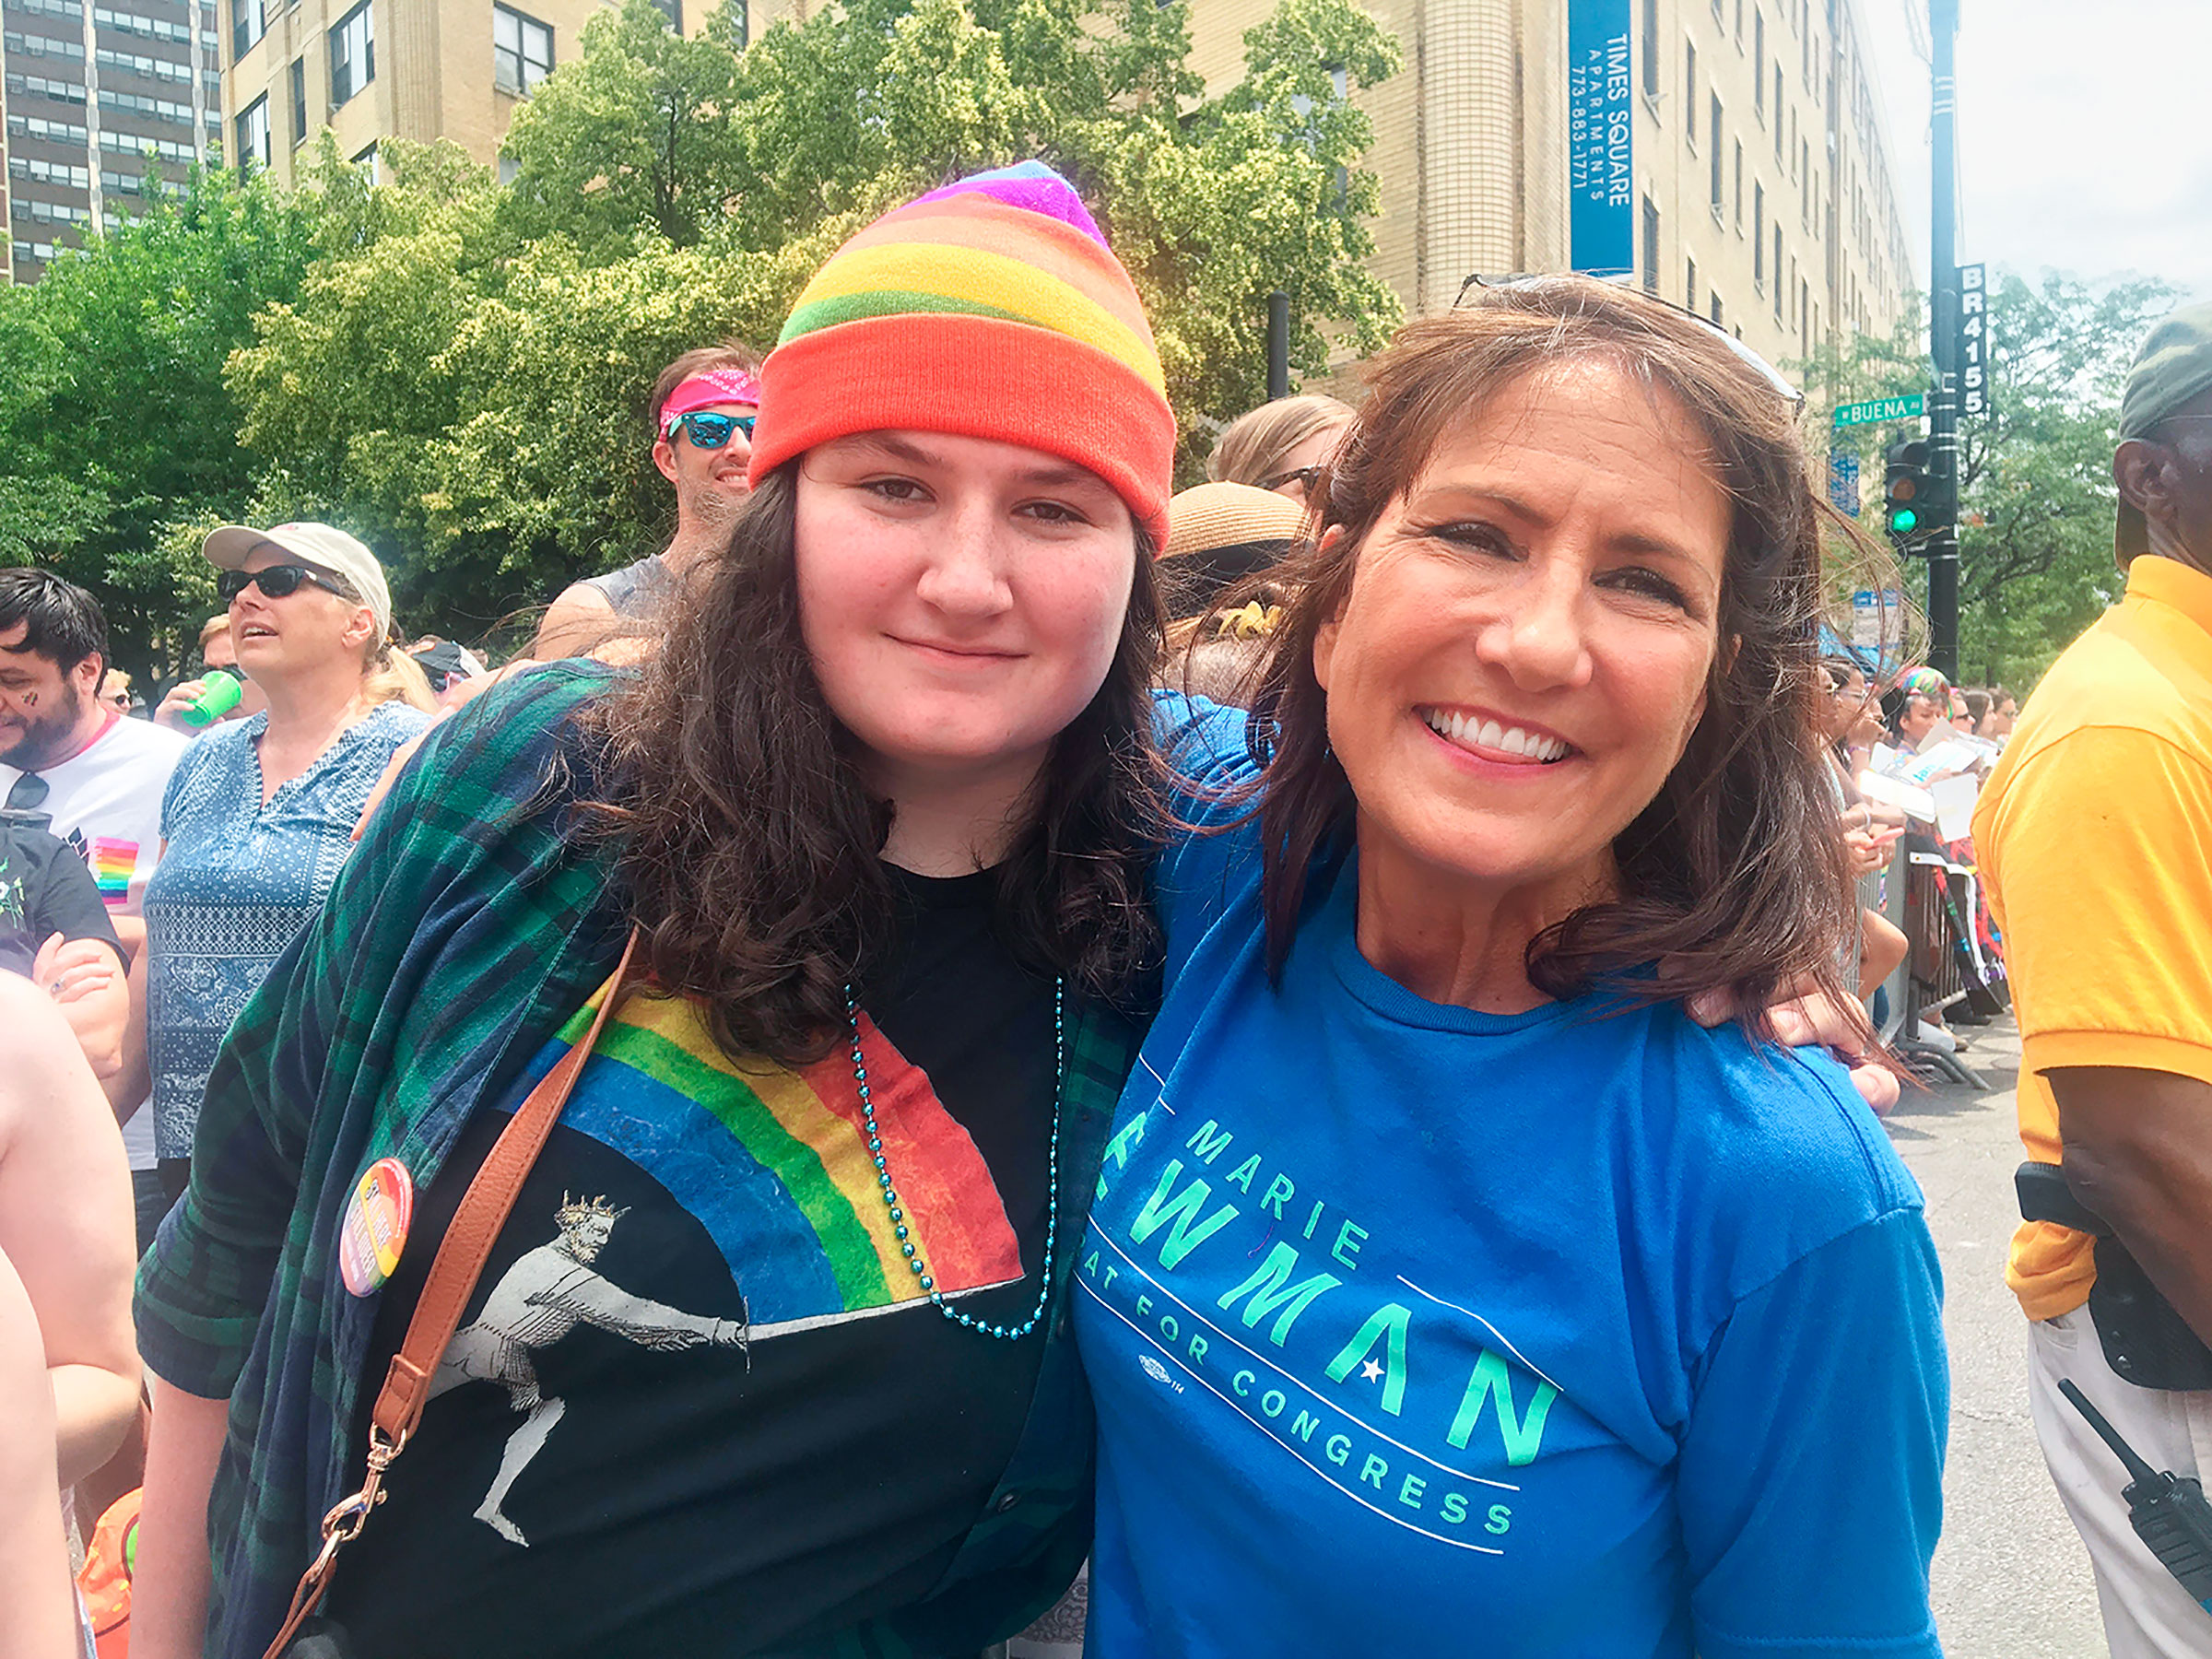 Congresswoman Marie Newman, right, and her daughter Evie Newman, left, at the 2019 Chicago Pride Parade. (Courtesy Marie Newman for Congress)